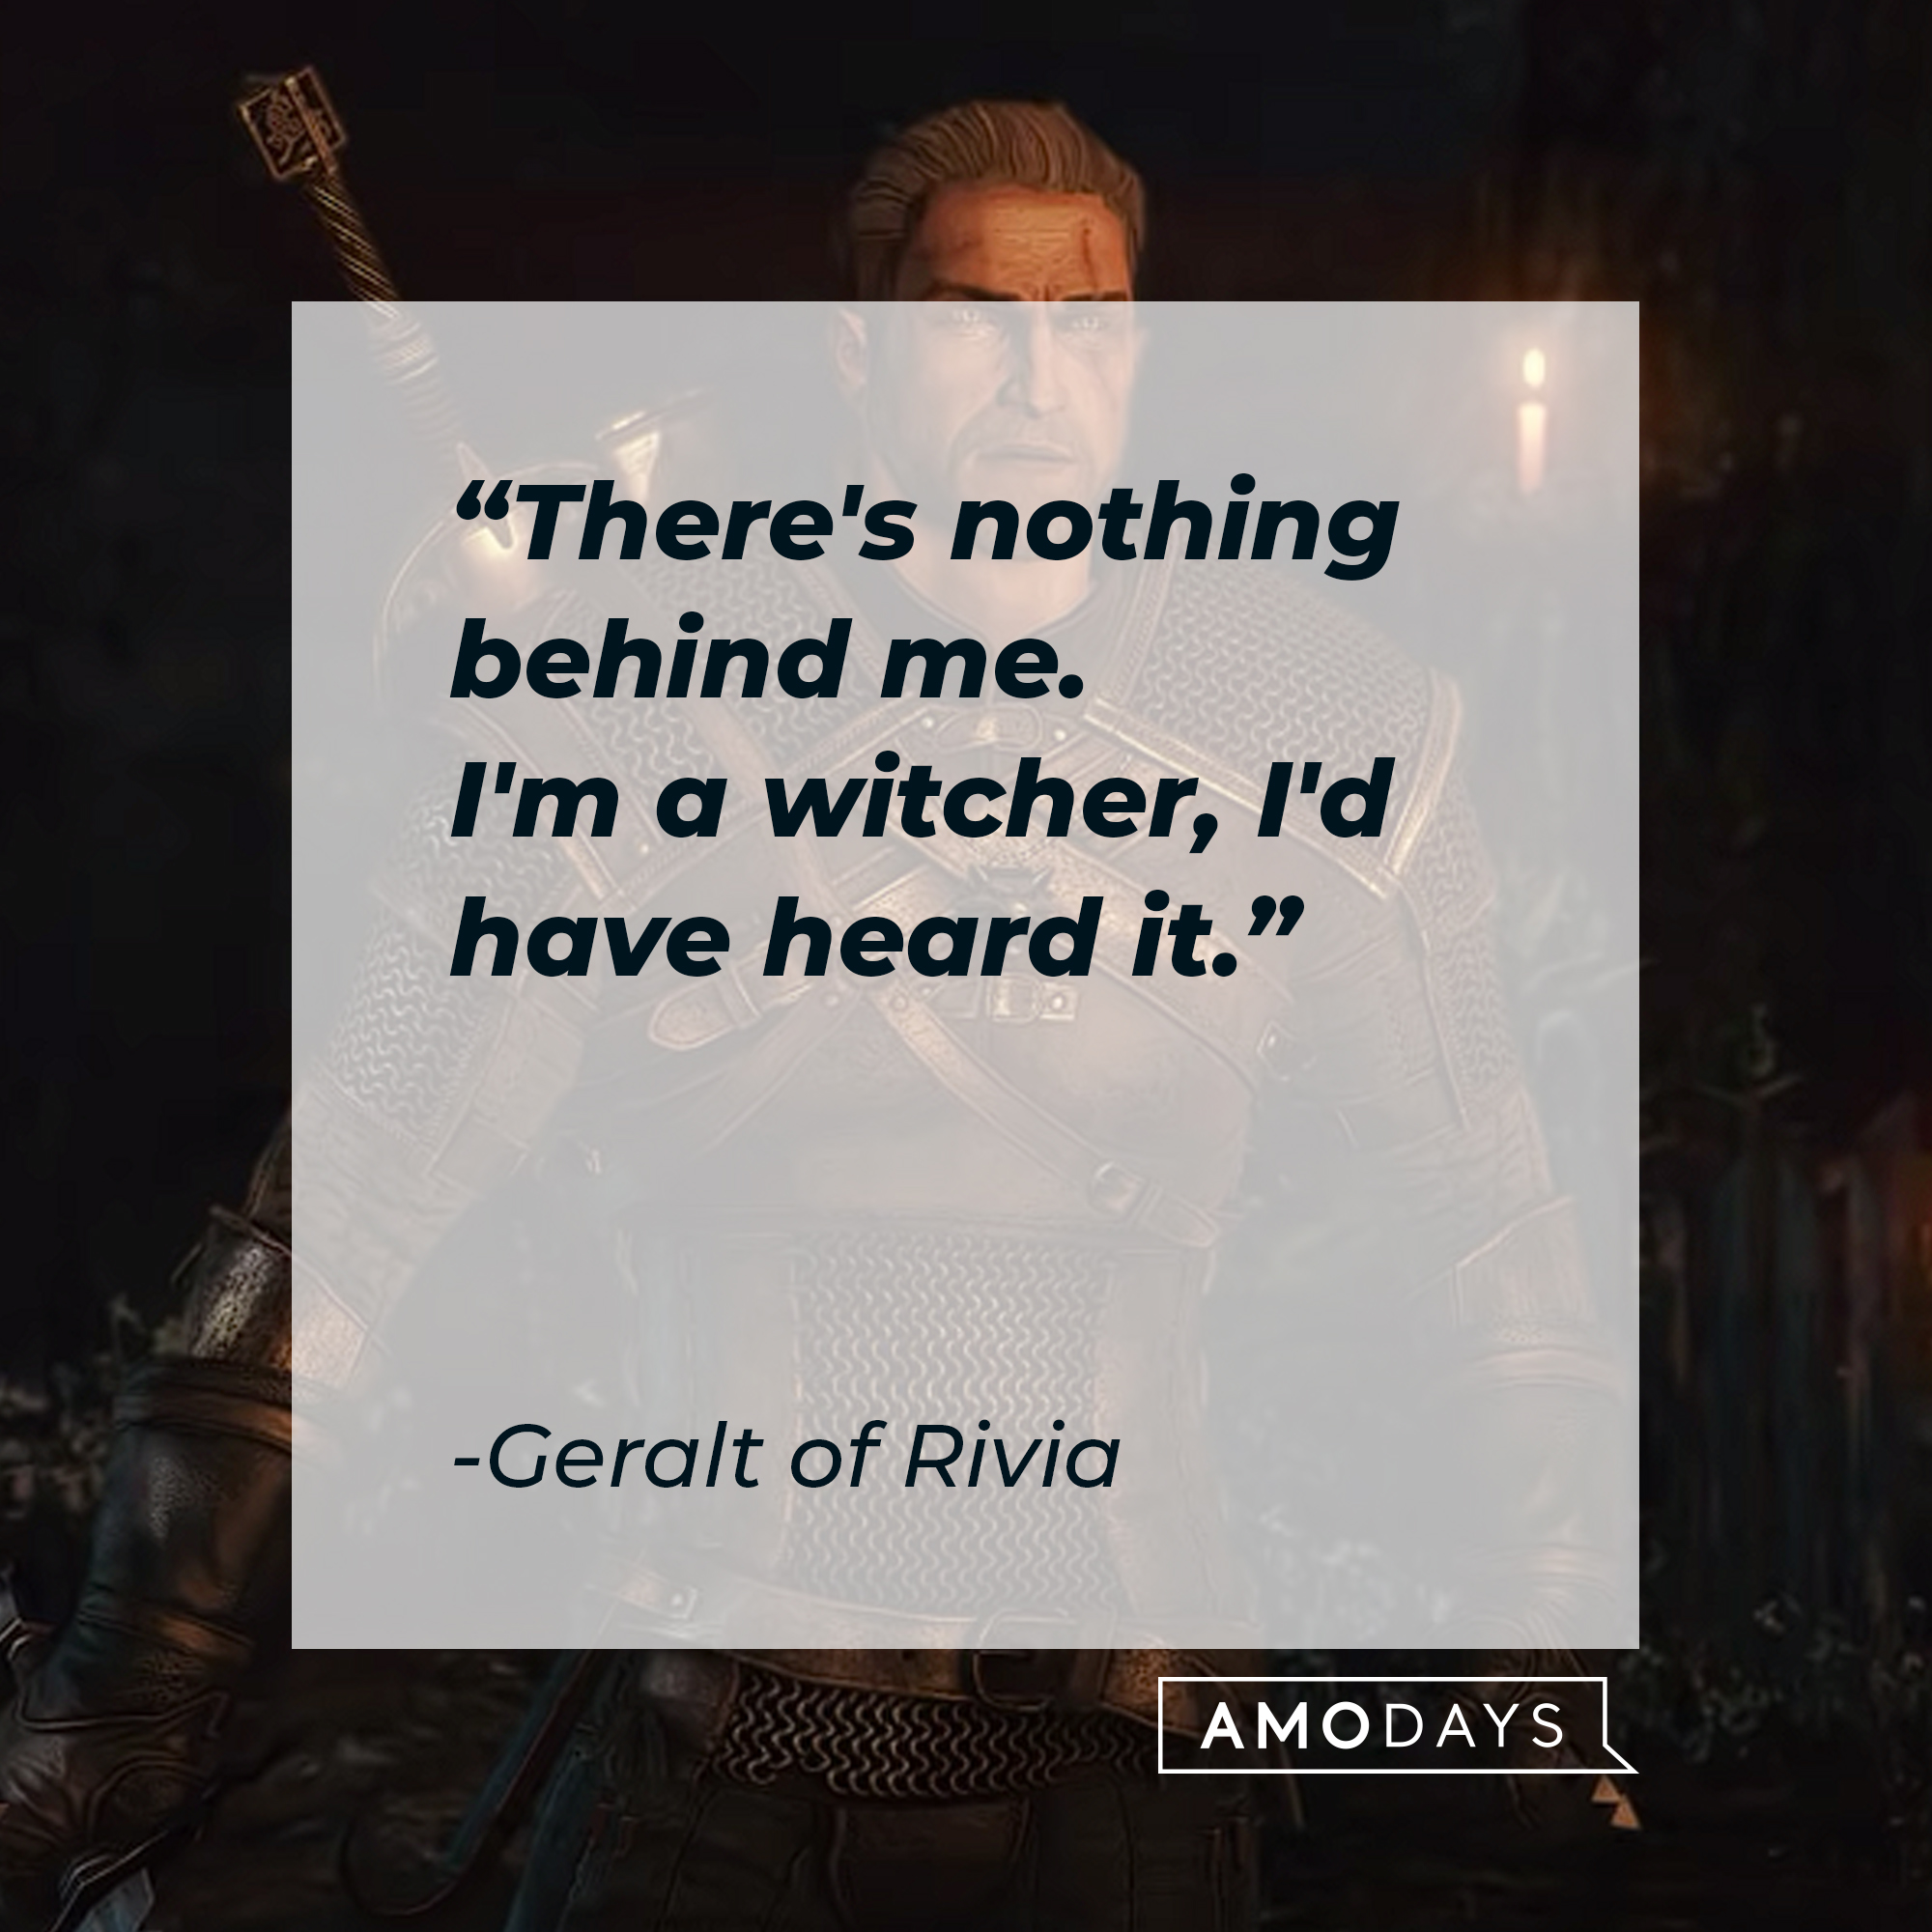 Geralt of Rivia from the video game with his quote: "There's nothing behind me. I'm a witcher, I'd have heard it.” | Source: youtube.com/thewitcher